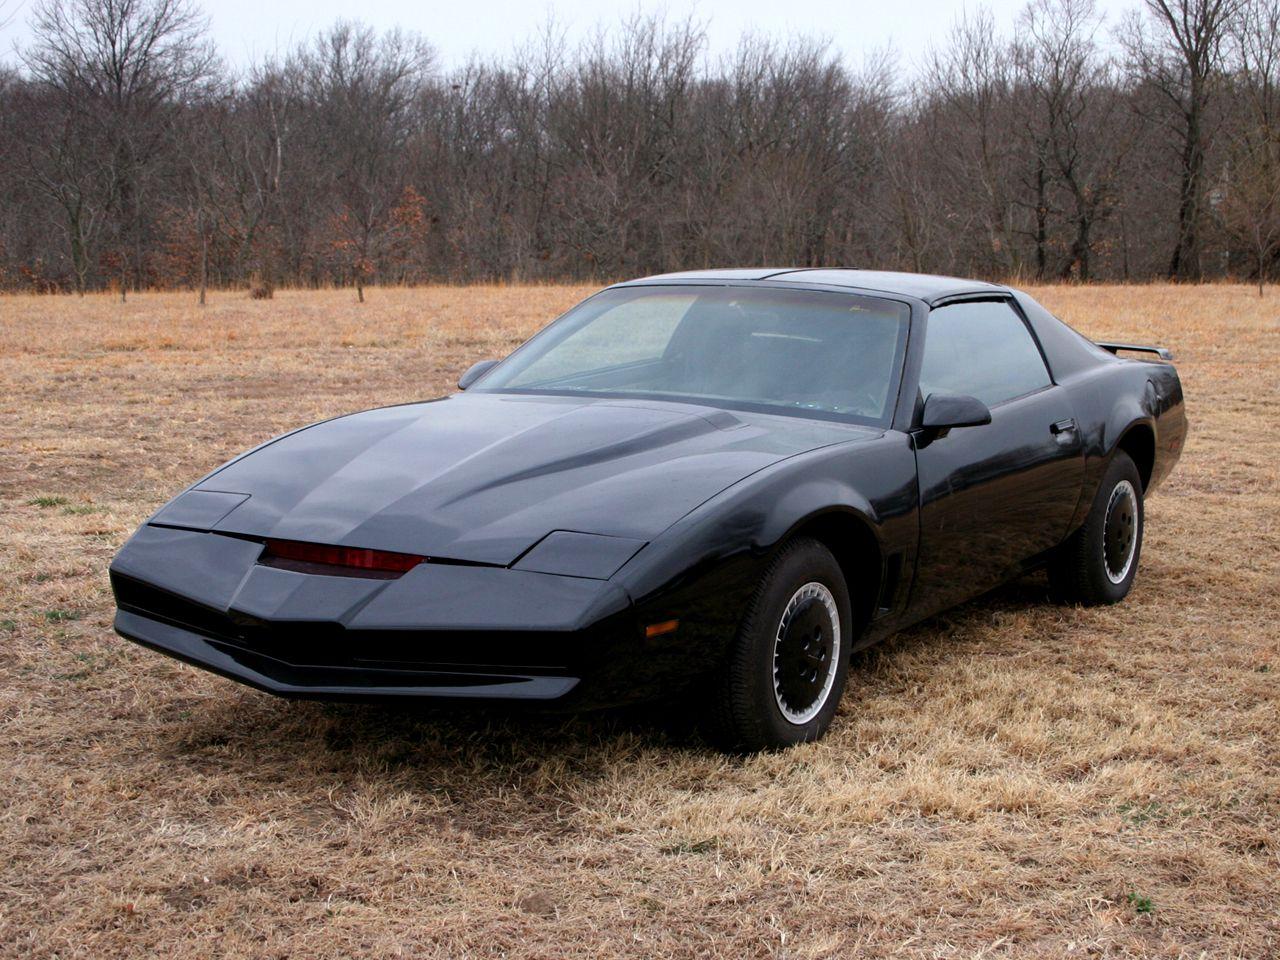 Knight Industries Two Thousand (K.I.T.T.) '1982 tv show car